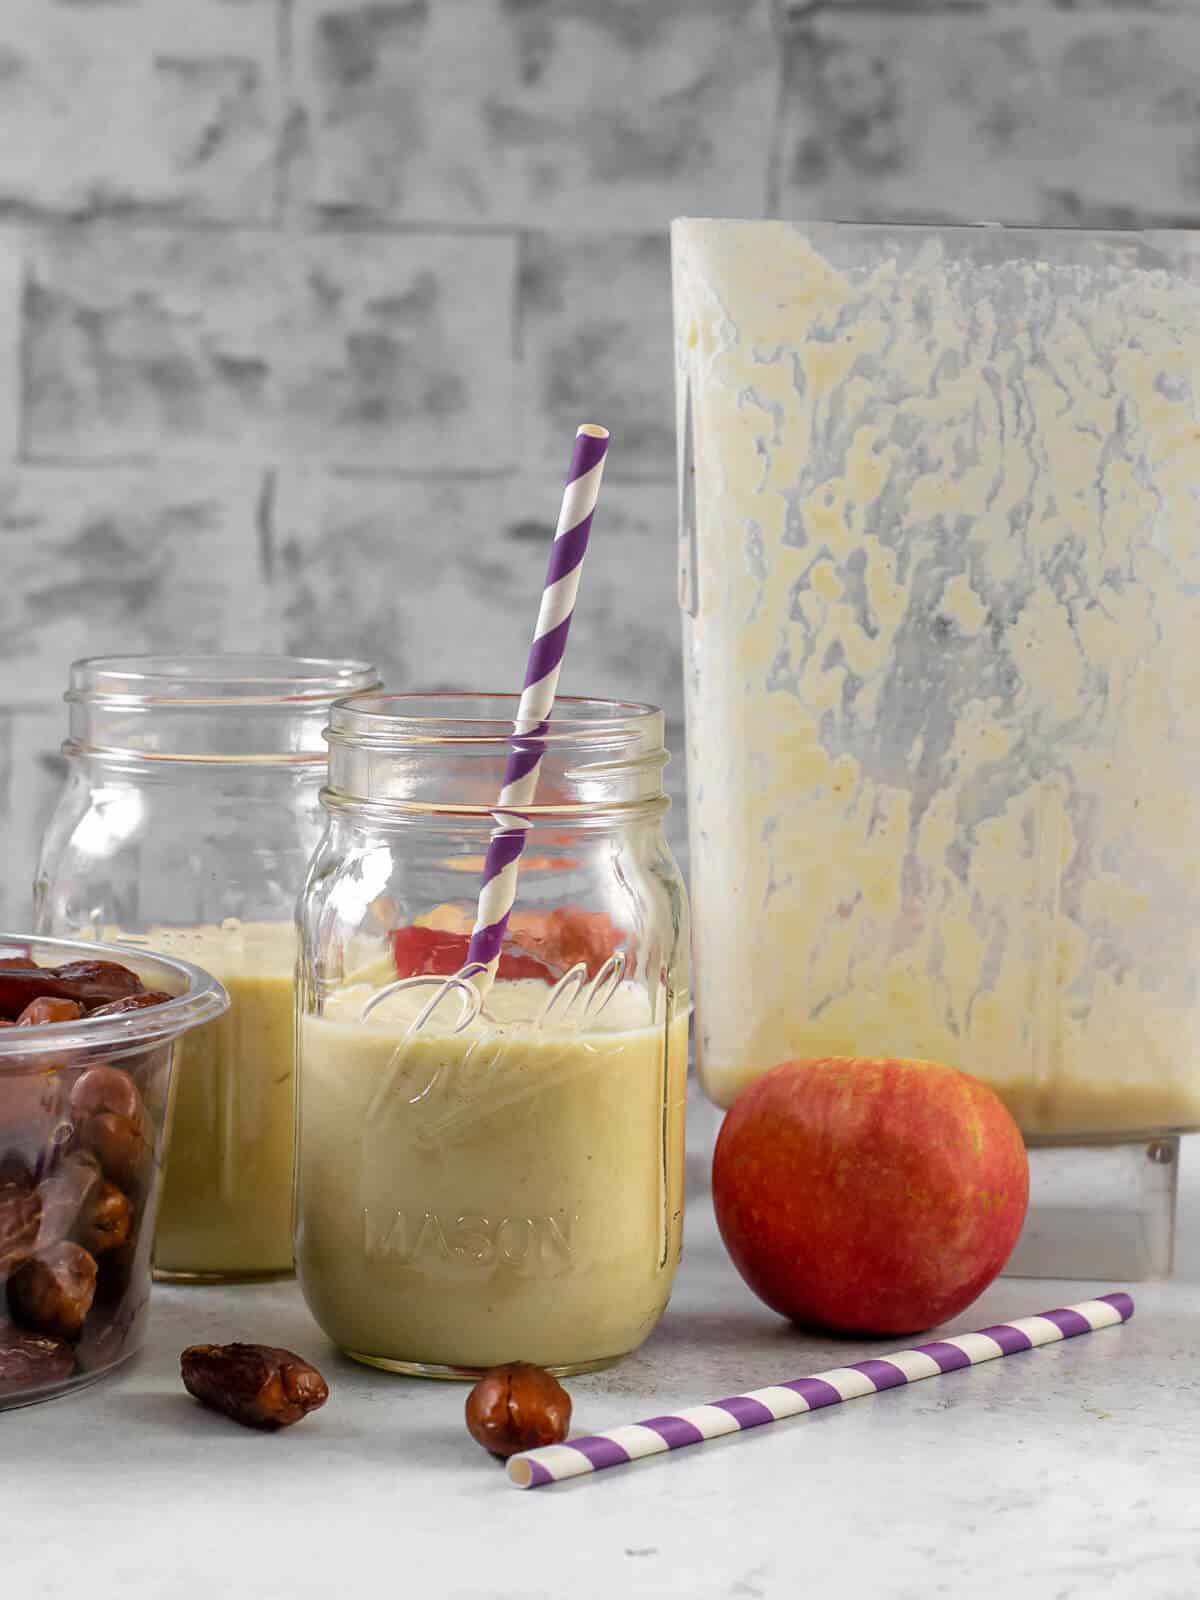 2 glass jars filled with Apple smoothie. A box of dates, an apple, along with a purple straw and a blender jar are on the side.